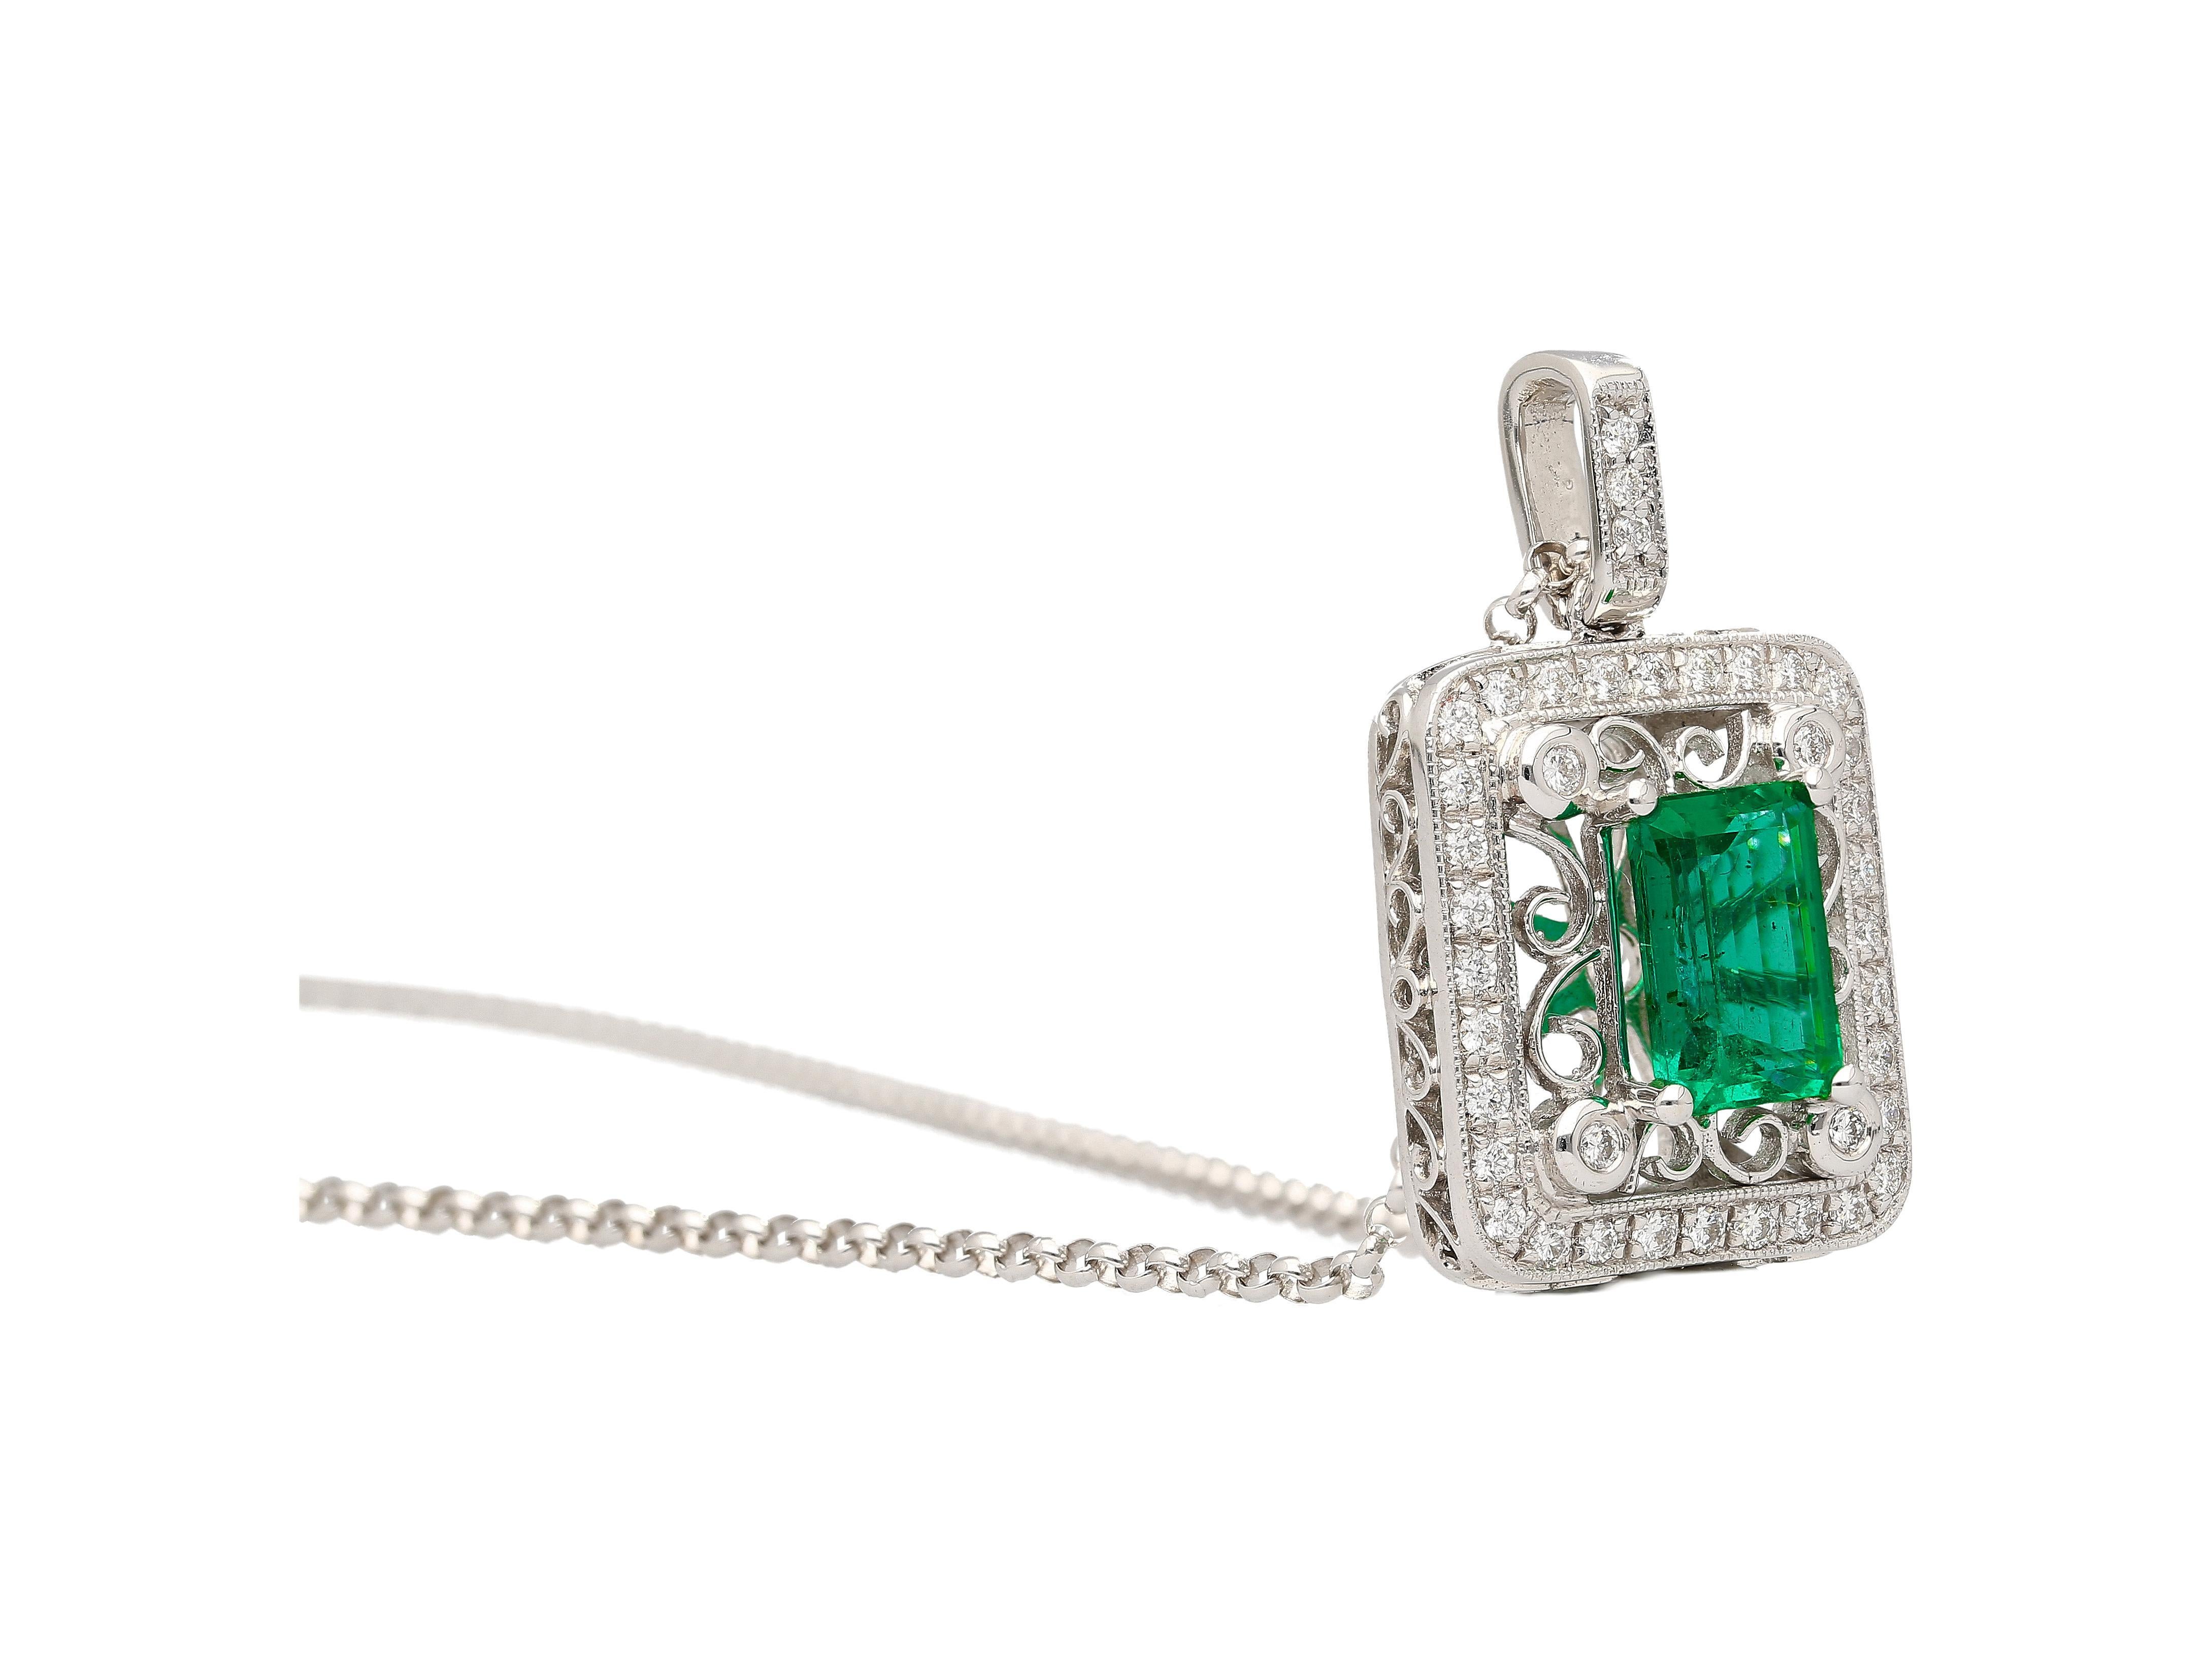 GIA Certified 1.39 Carat Zambian Emerald and Diamond Floral Box Pendant Necklace For Sale 2